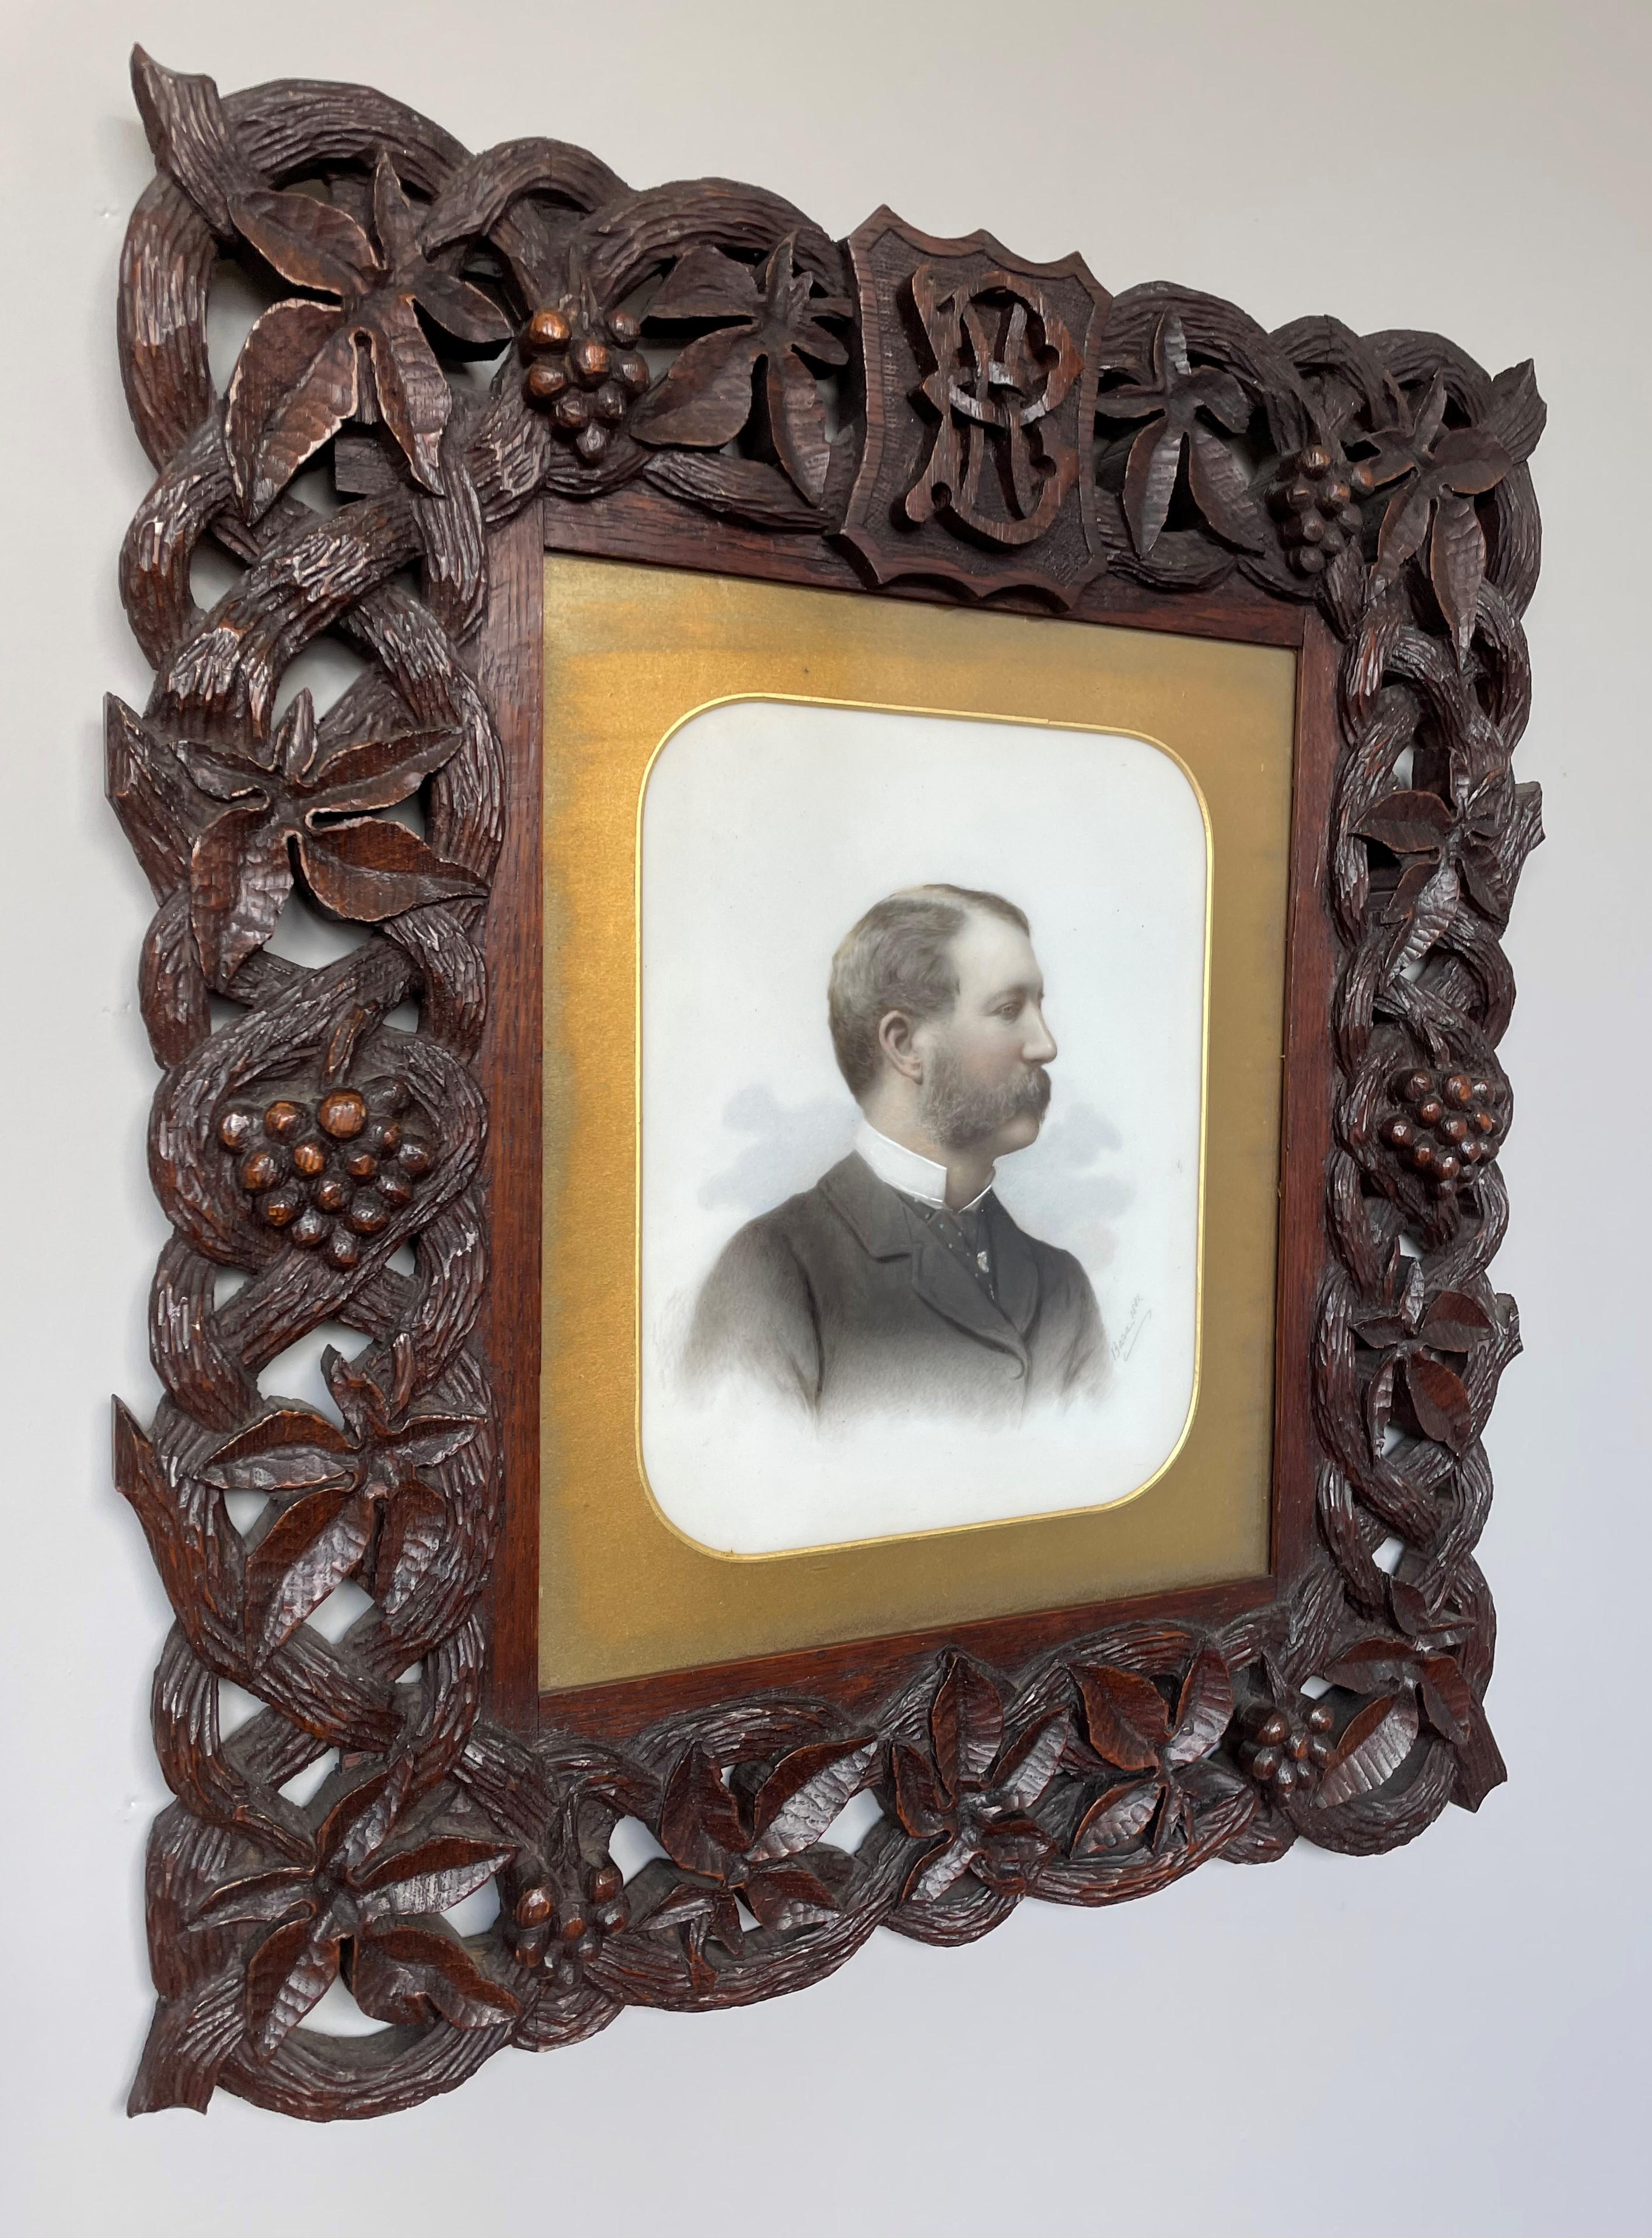 Swiss Antique Pair of Black Forest Photo Frames / Wall Mirrors with Grapevine Frames For Sale